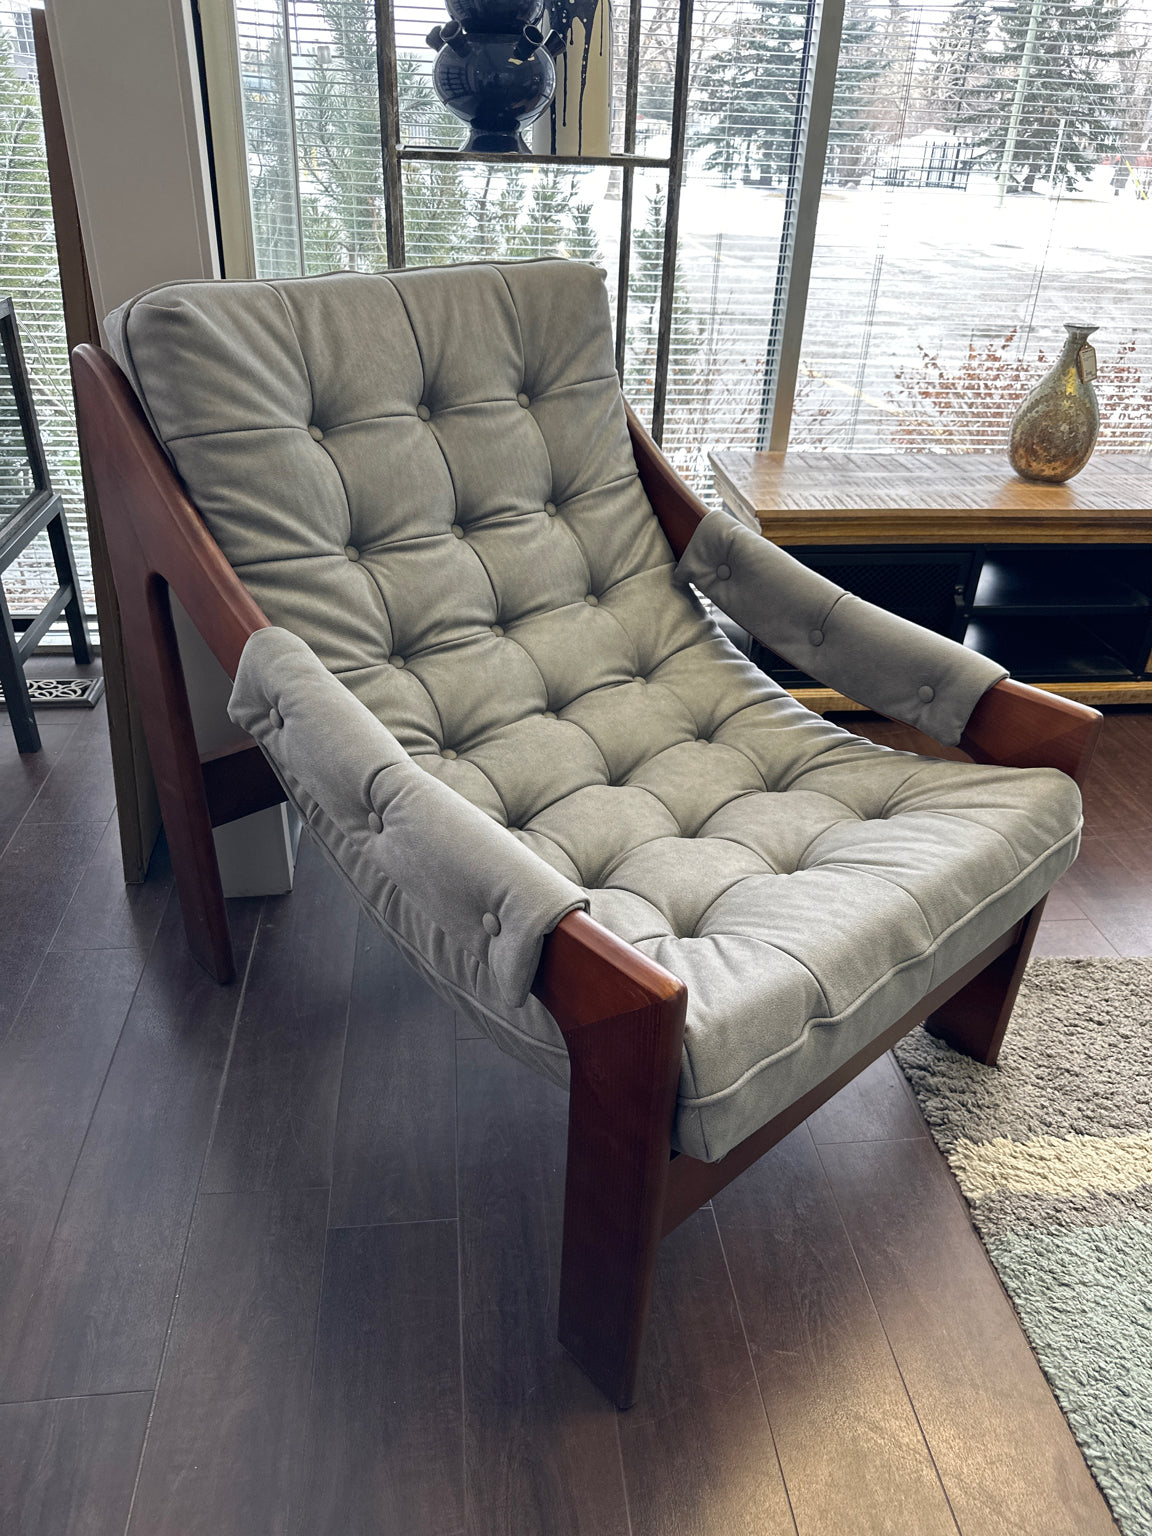 Tufted Grey Fabric "Sling" Chair W/Chestnut Finish Solid Wood Frame/Arms